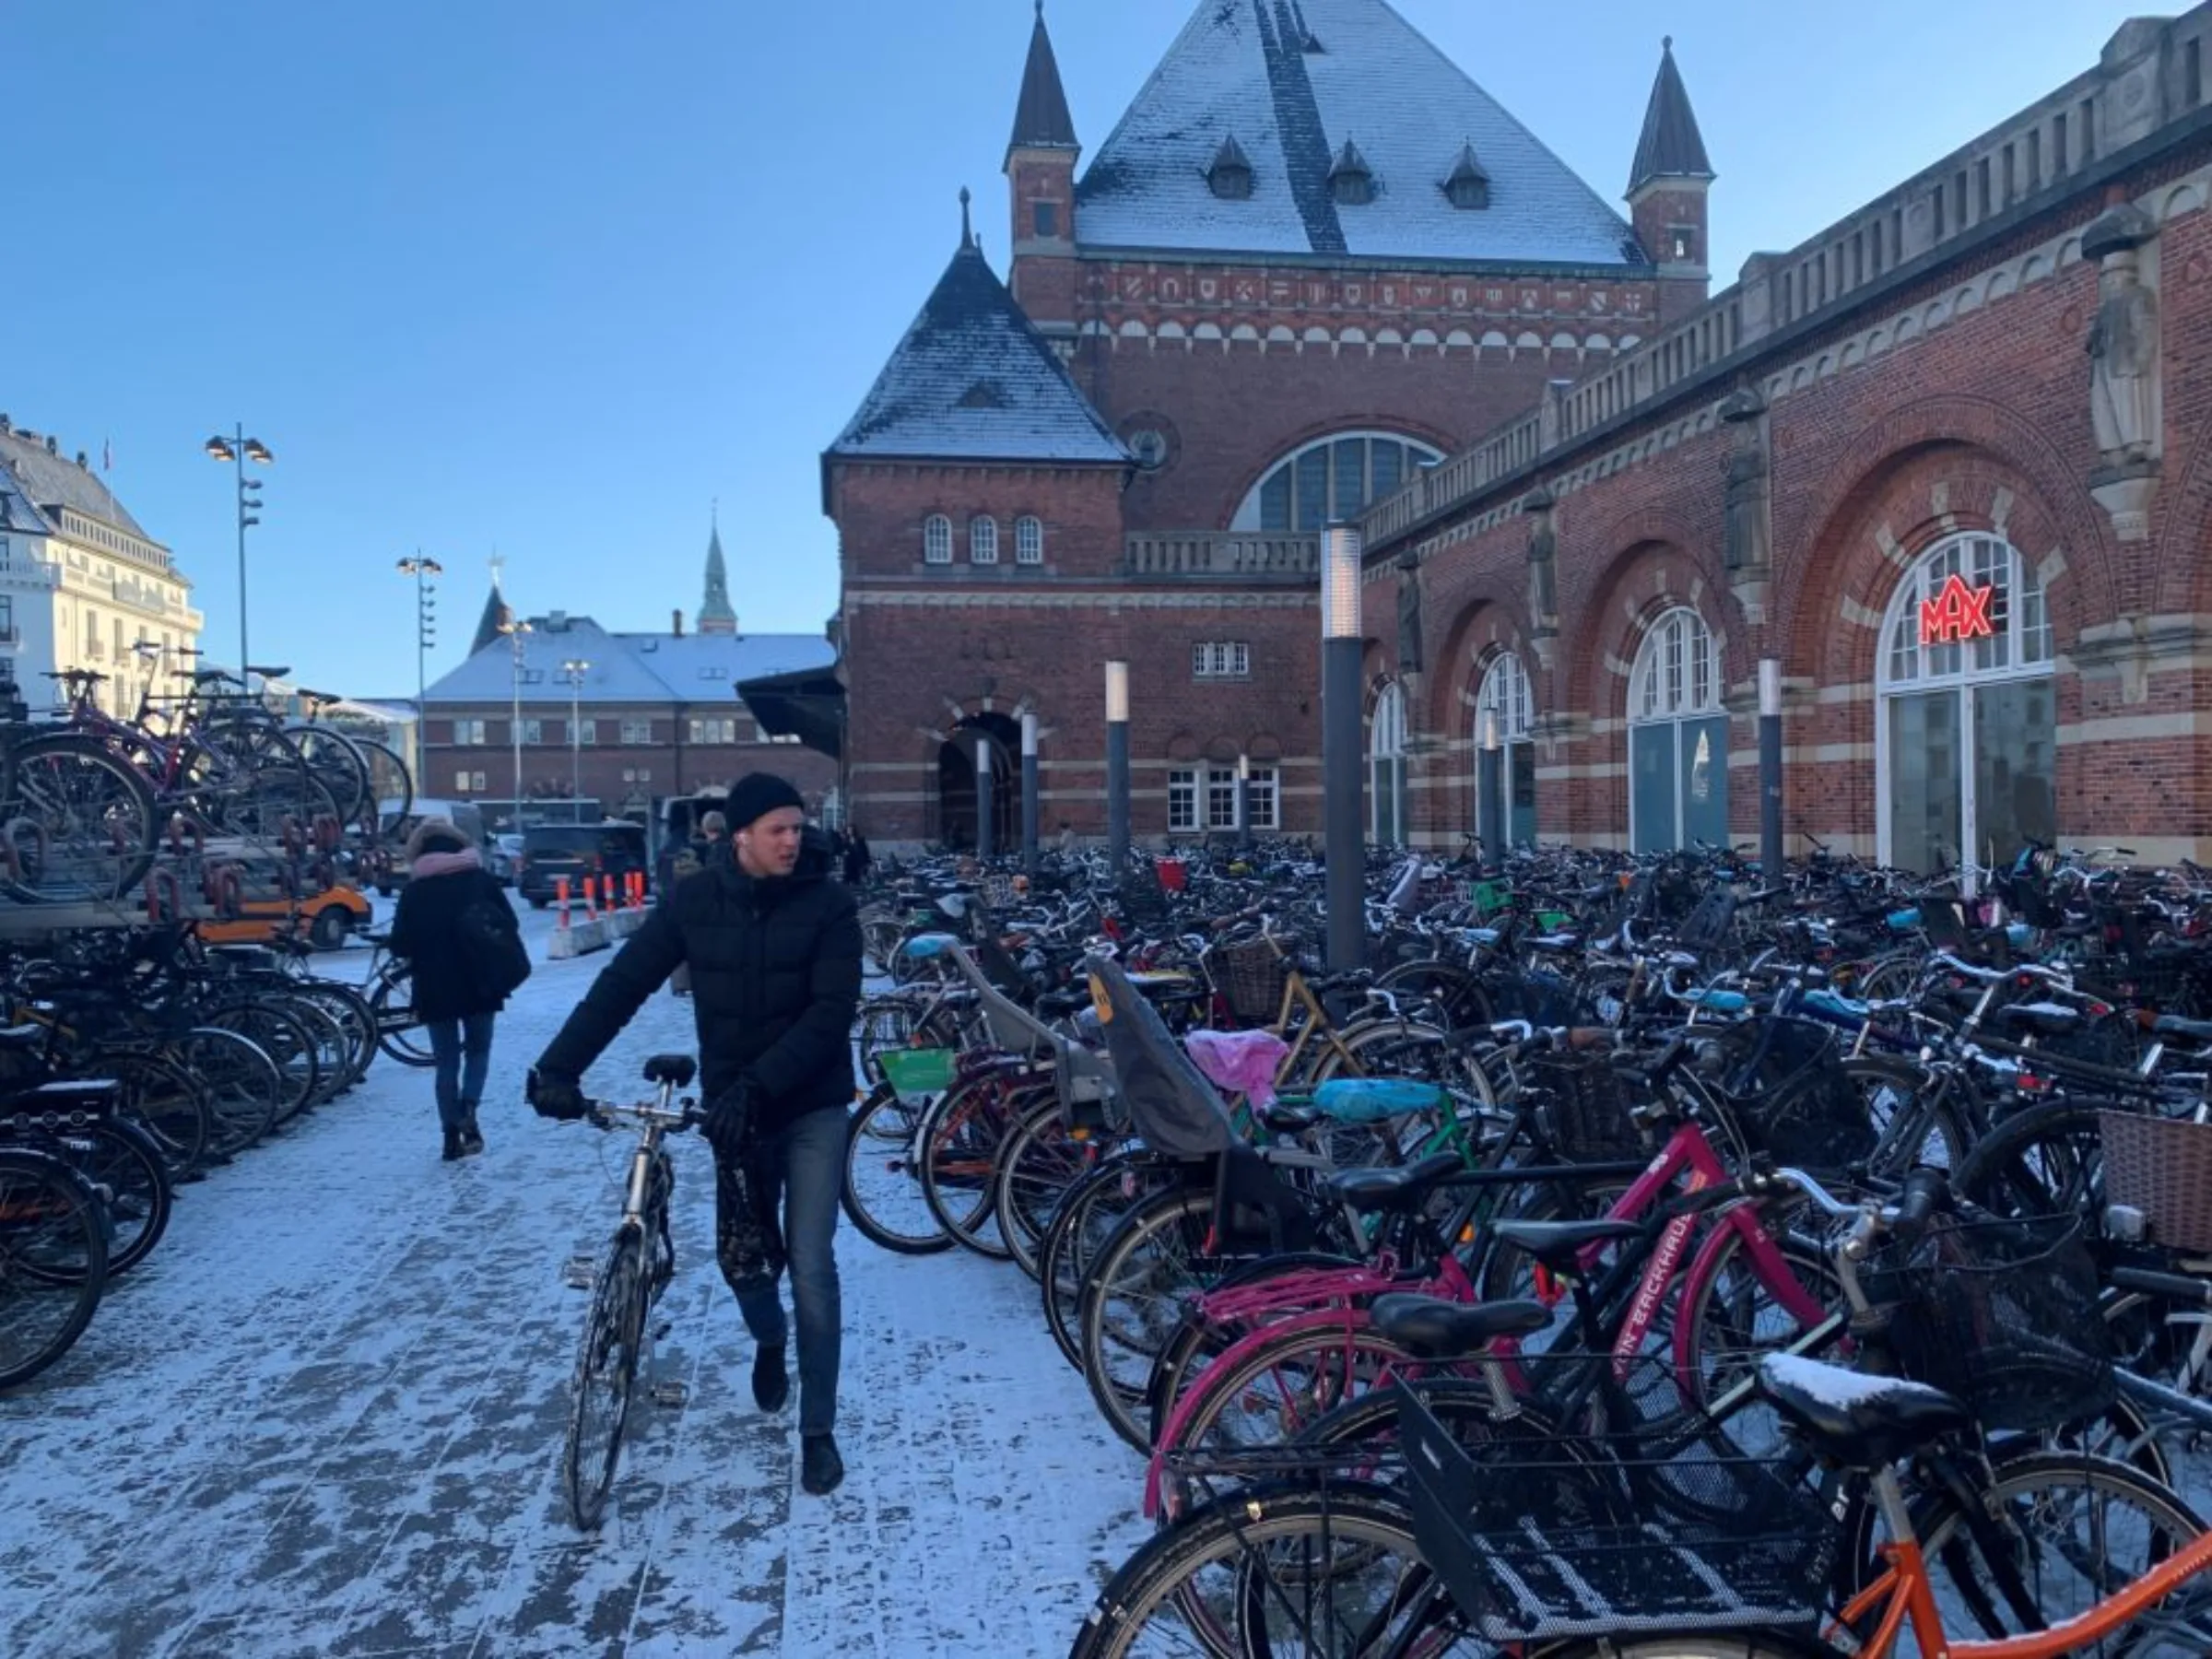 A commuter searches for a place to park his bicycle outside Copenhagen’s central station, March 28, 2023